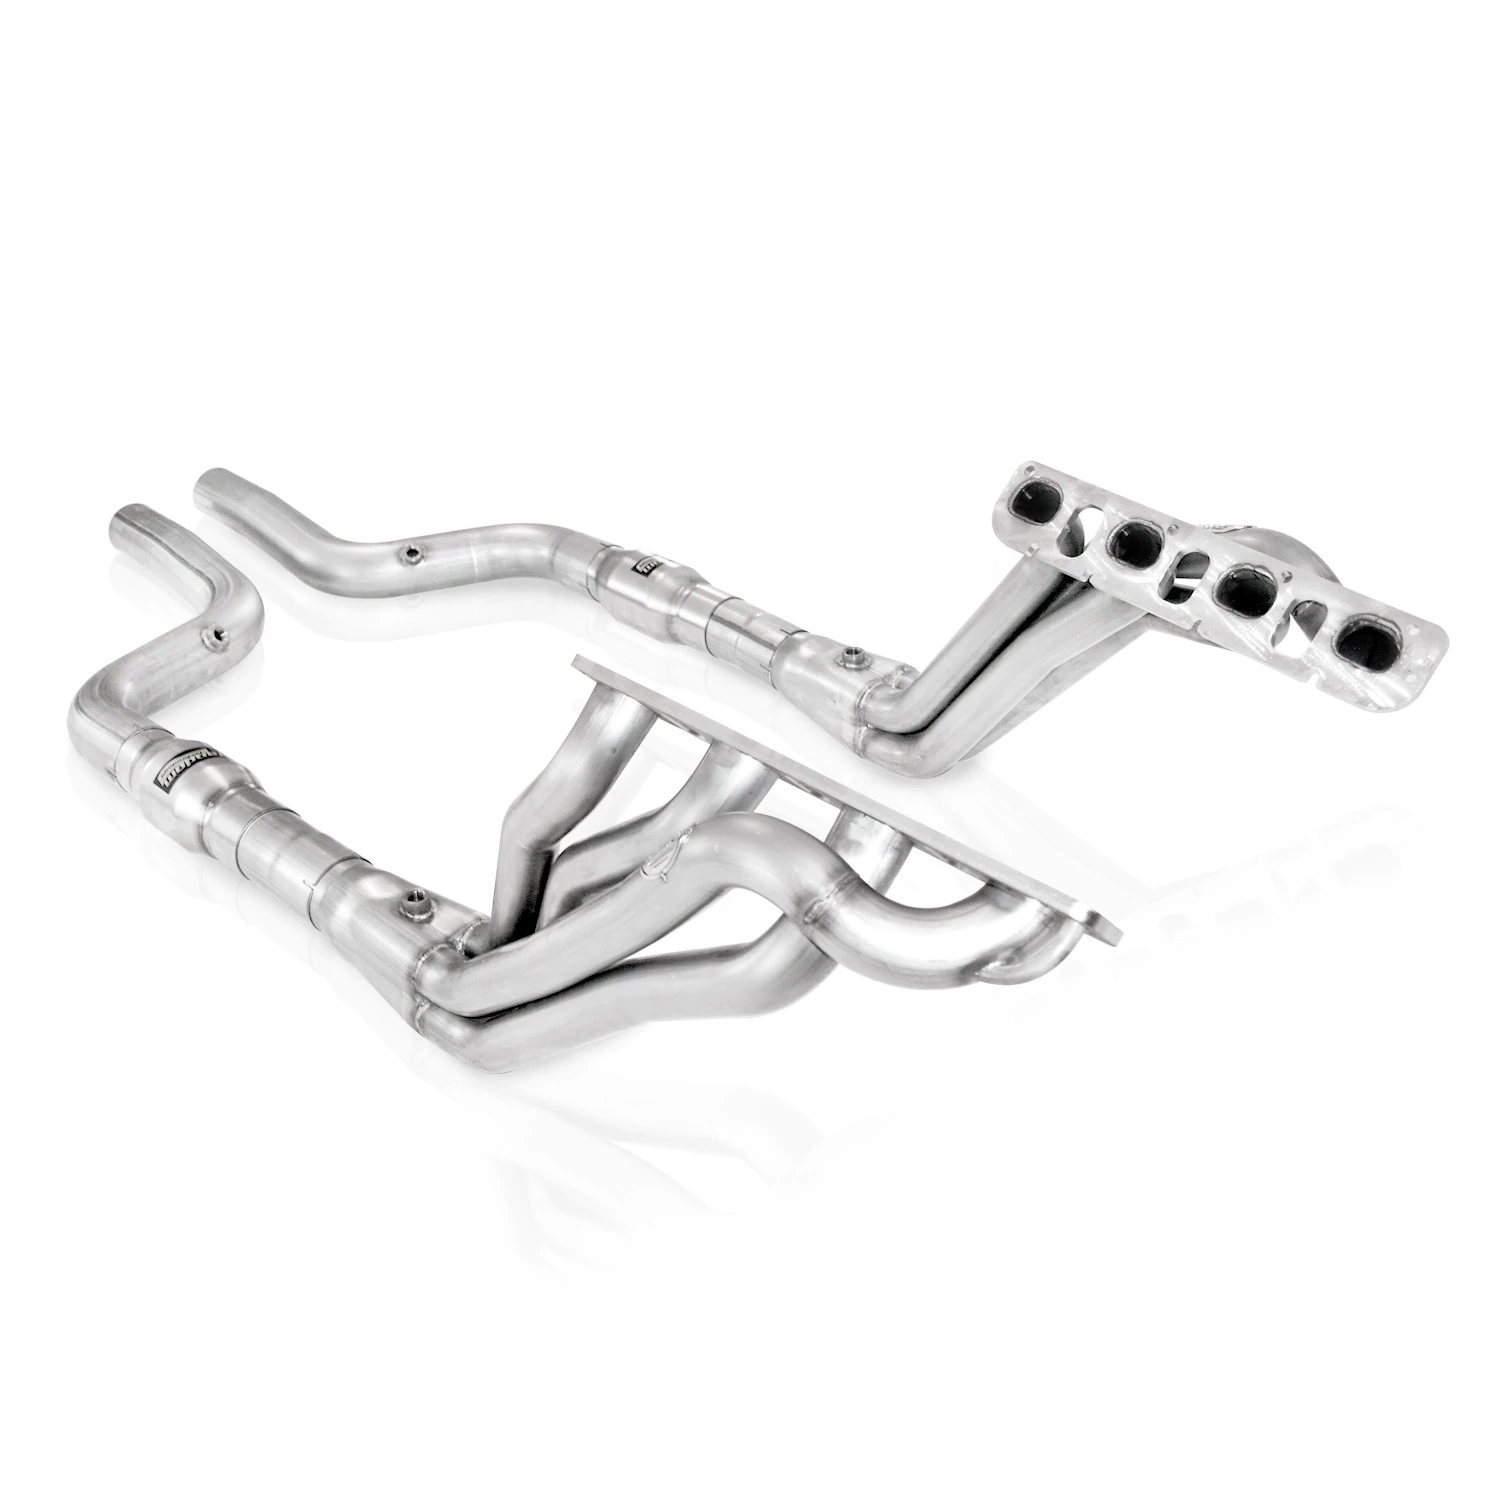 Stainless Works Stainless Power Series Long Tube Headers 05-23 Dodge Charger/Challenger/300/Magnum 5.7 / 6.1 / 6.4 / 6.2